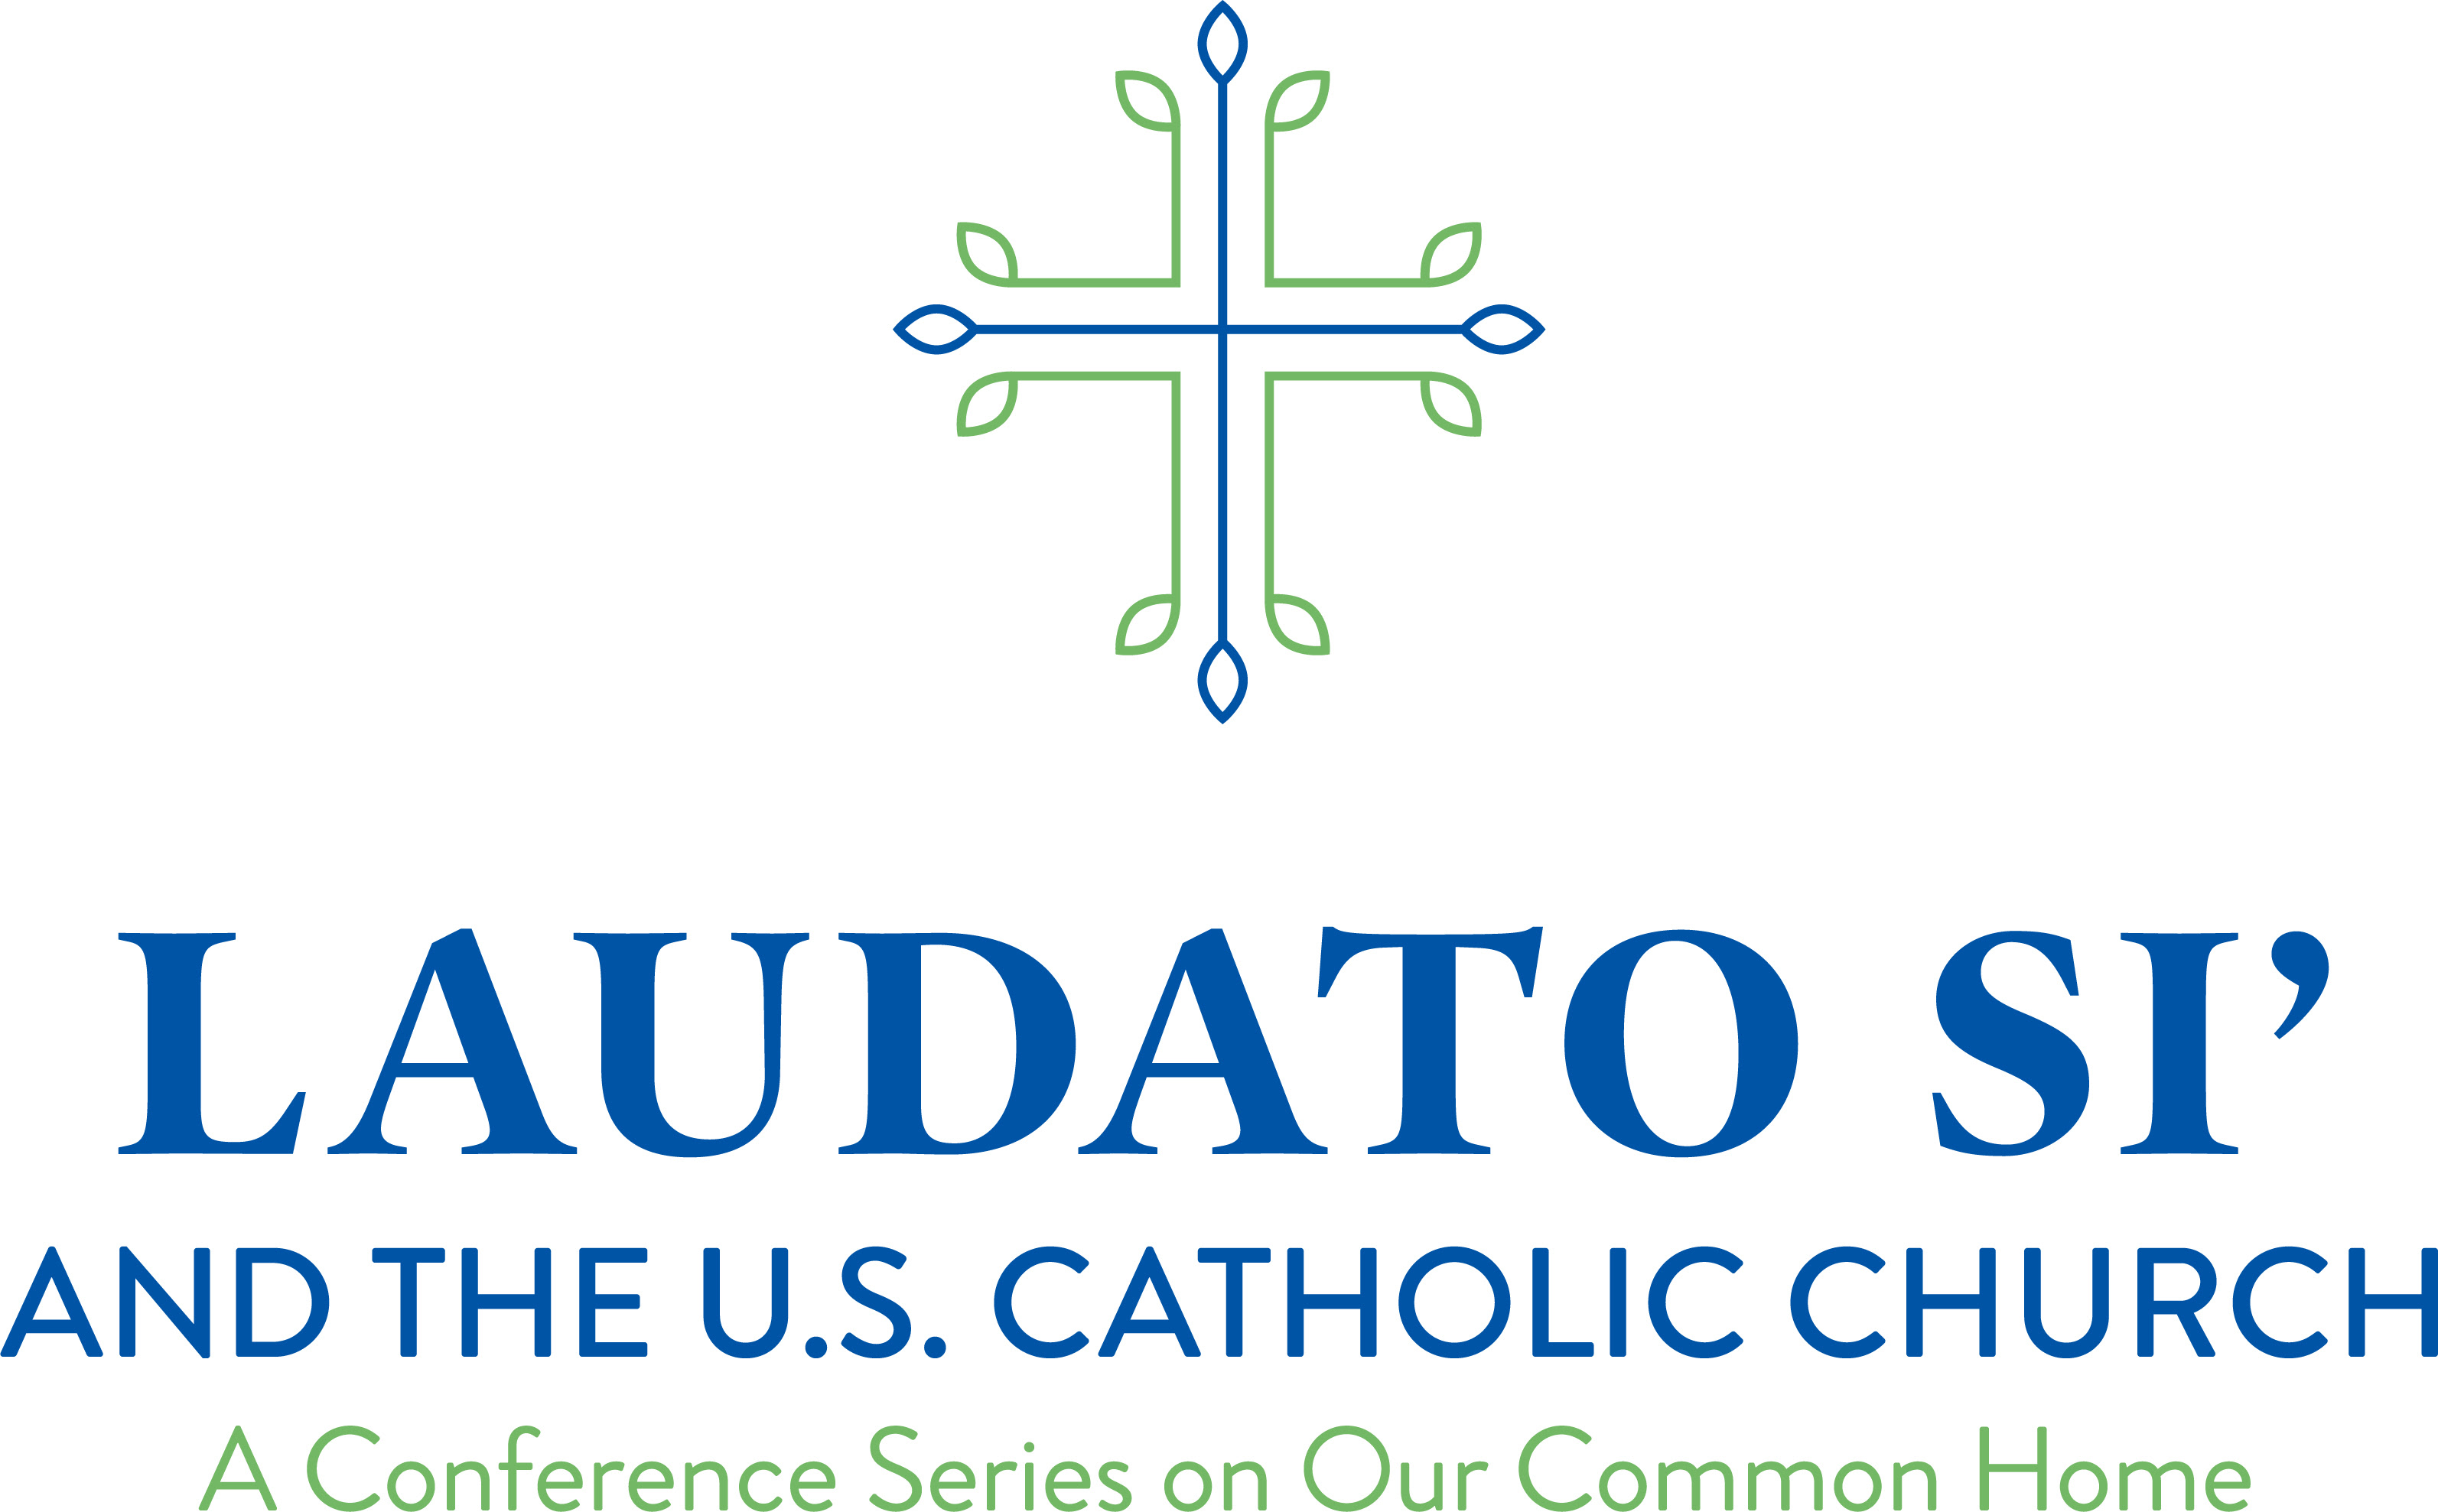 Image of a blue and green cross with decorations suggesting leaves. Text reads "Laudato Si' and the U.S. Catholic Church: A Conference Series on Our Common Home."